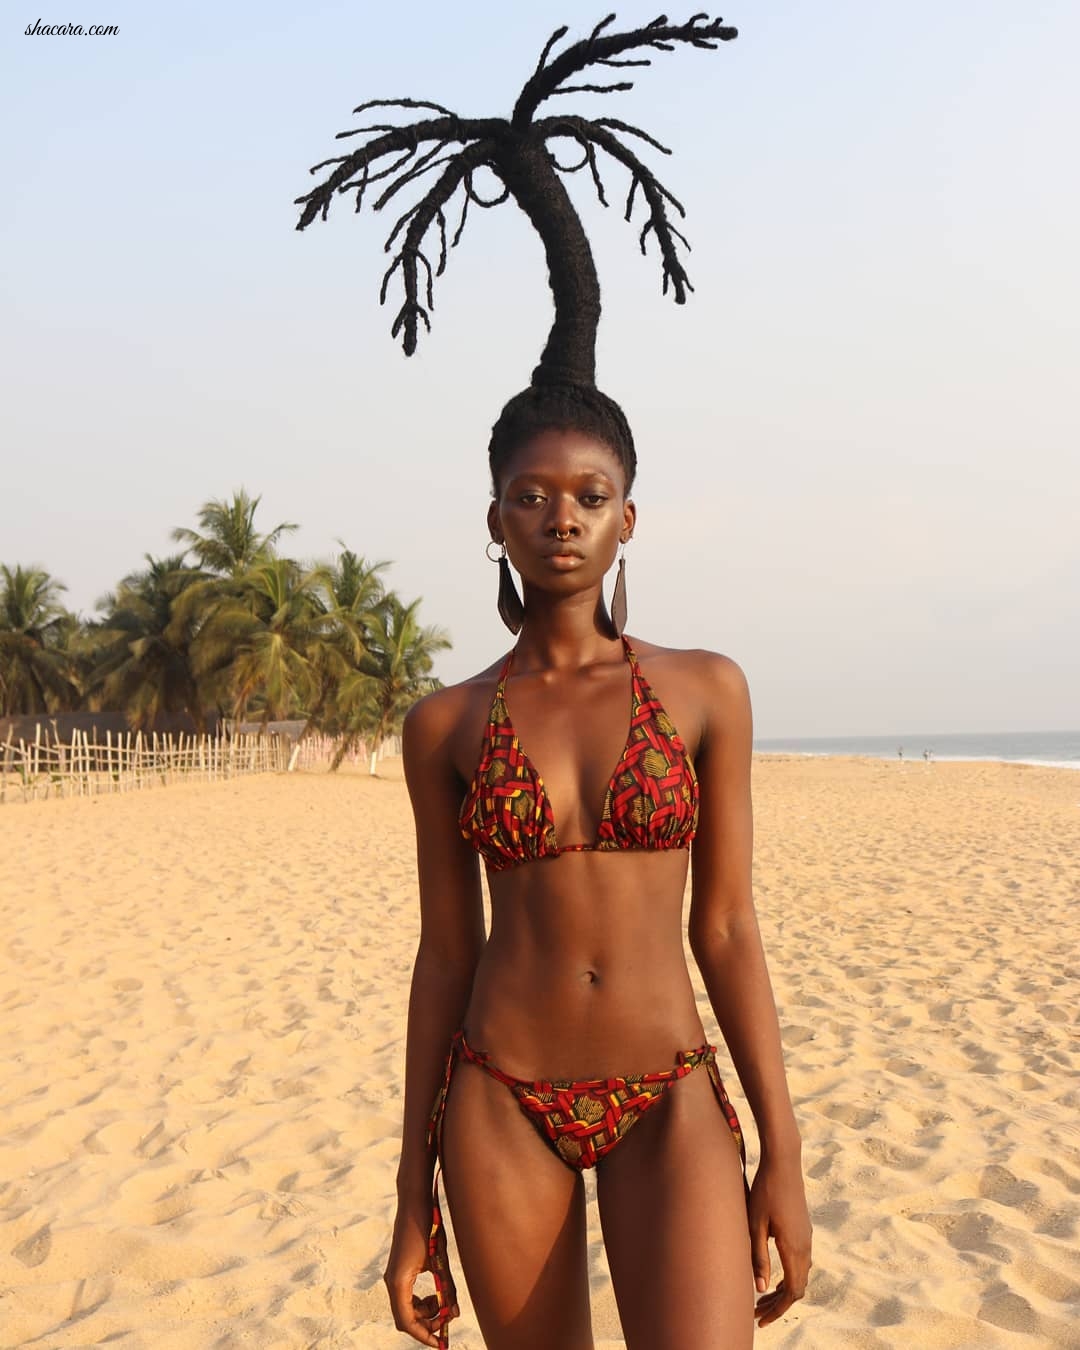 This Extremely Beautiful Ivorian, Laetitia, Amaze The World With Hair Tremendous Art